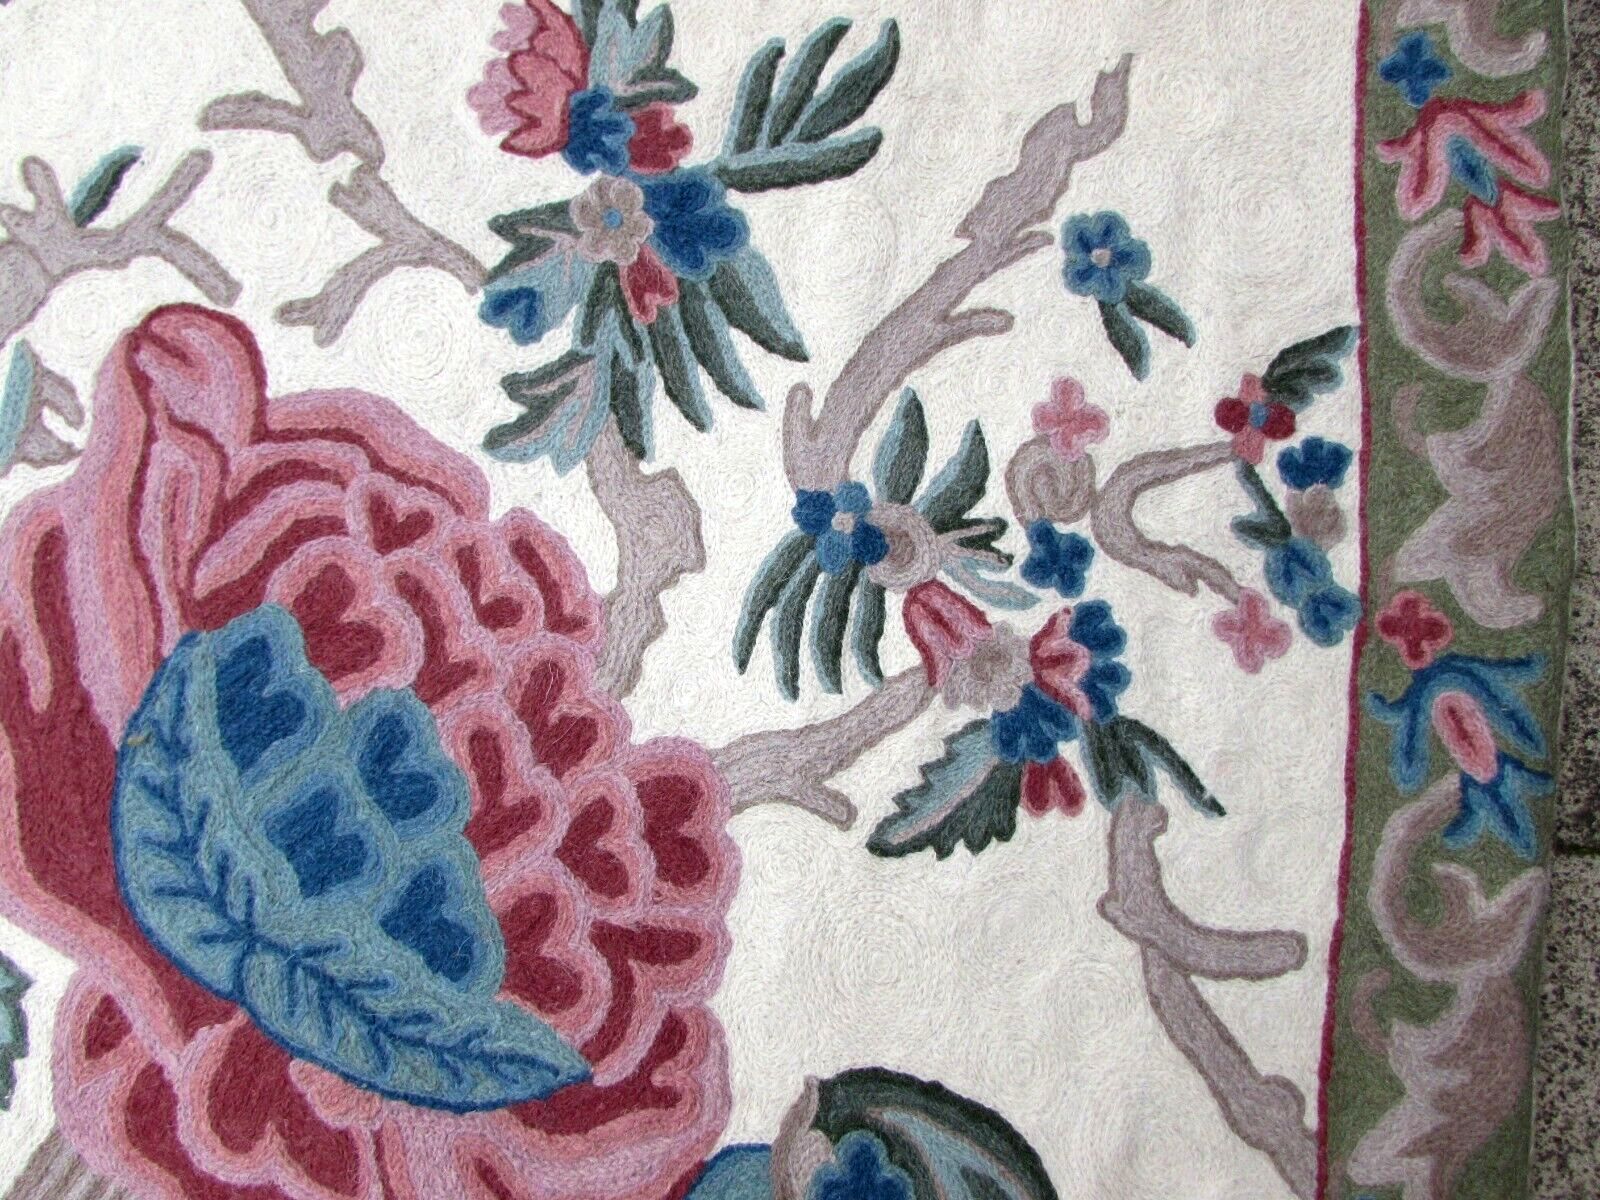 Detailed shot of the red, green, and blue hues in the Stitchwork design